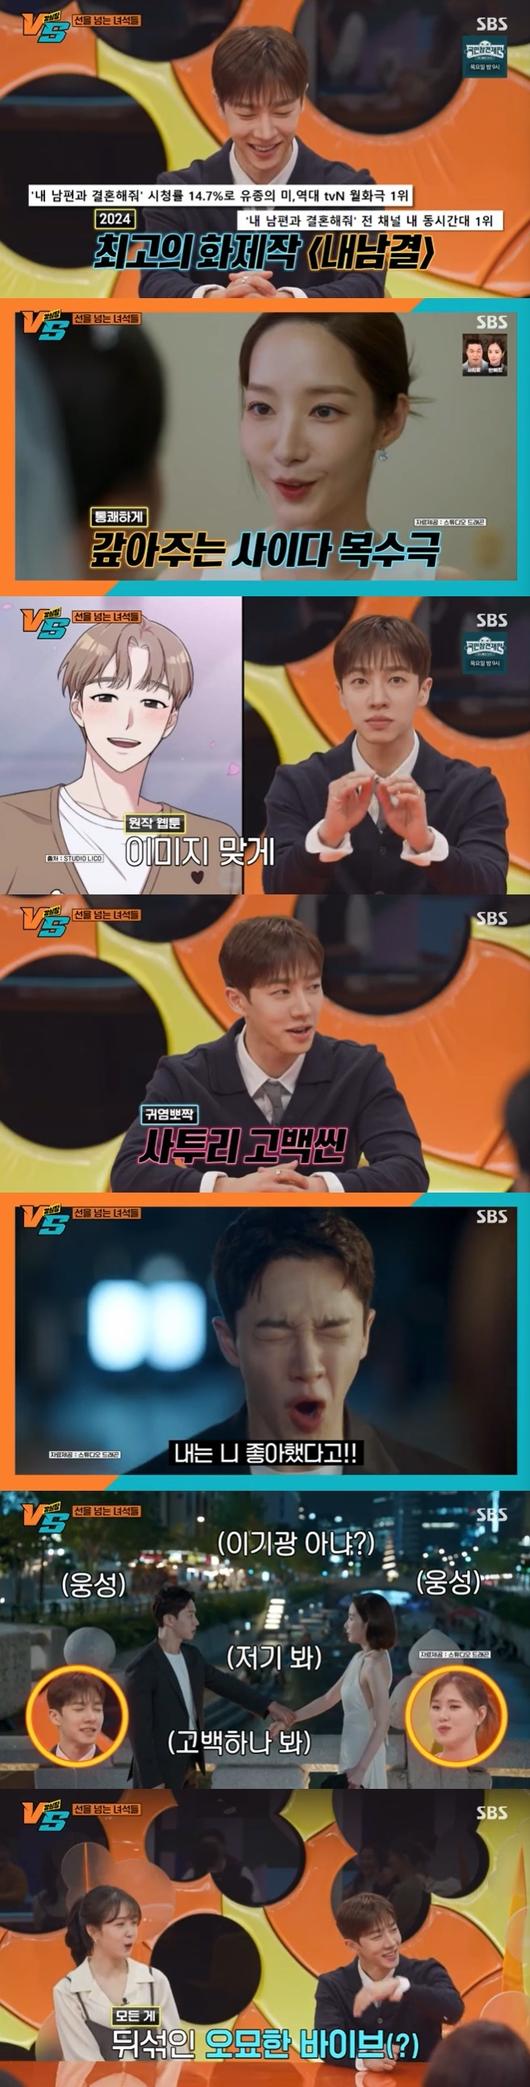 Lee Ki-kwang reveals the story behind the ‘My Boyfriend’ dialect confession scene